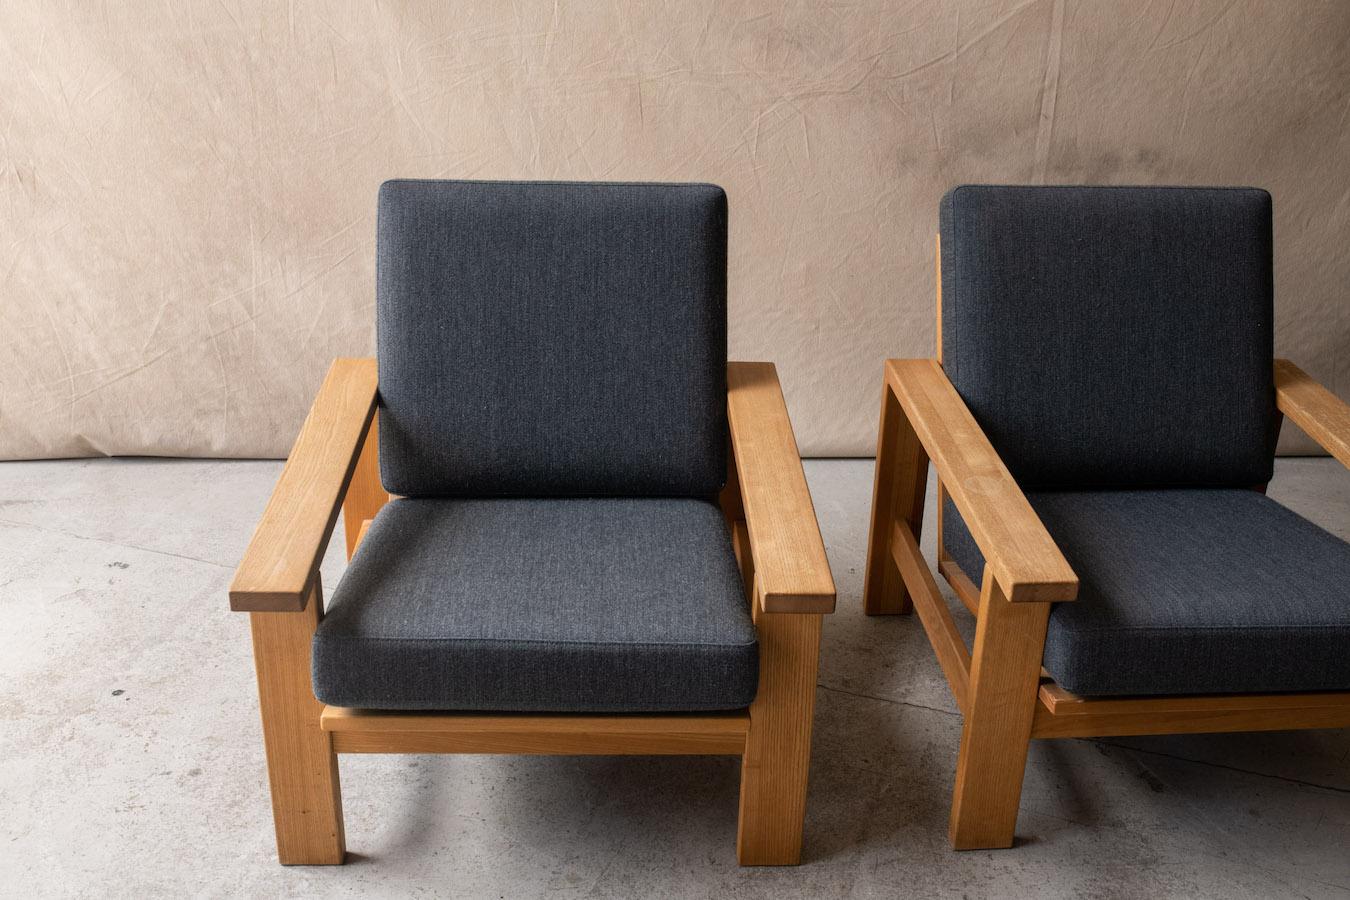 European Vintage Pair of Danish Lounge Chairs from France, circa 1960